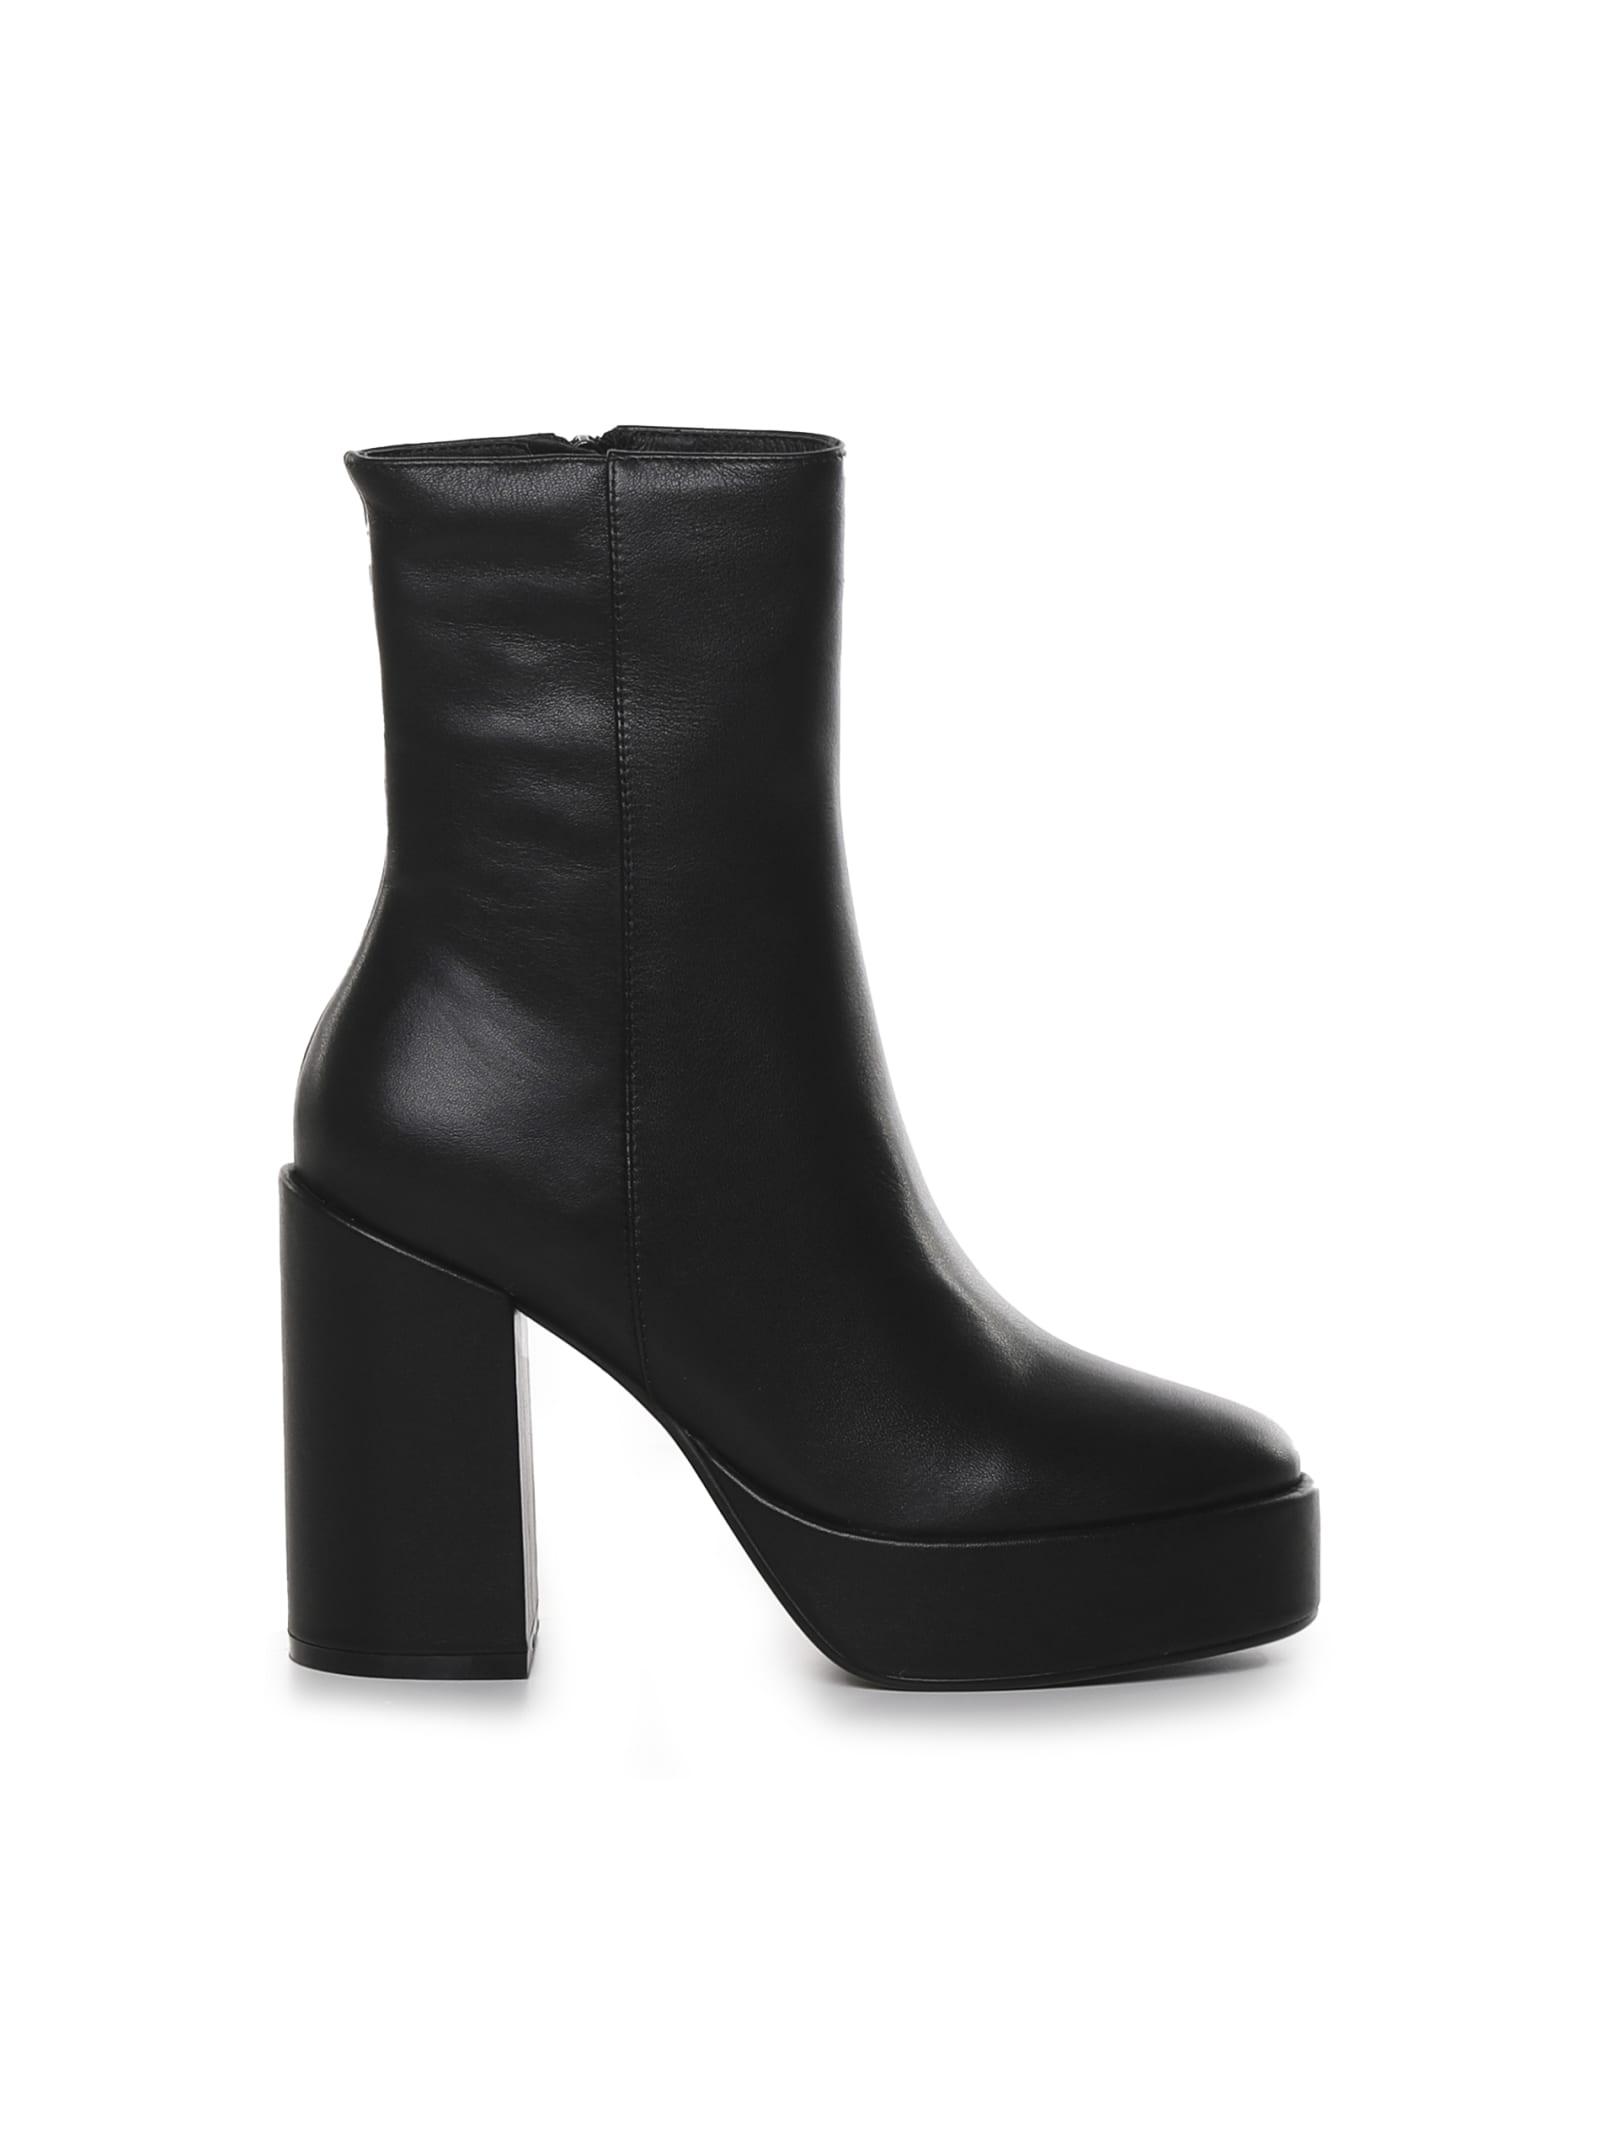 Bibi Lou Leather Boot With Heel in Black | Lyst